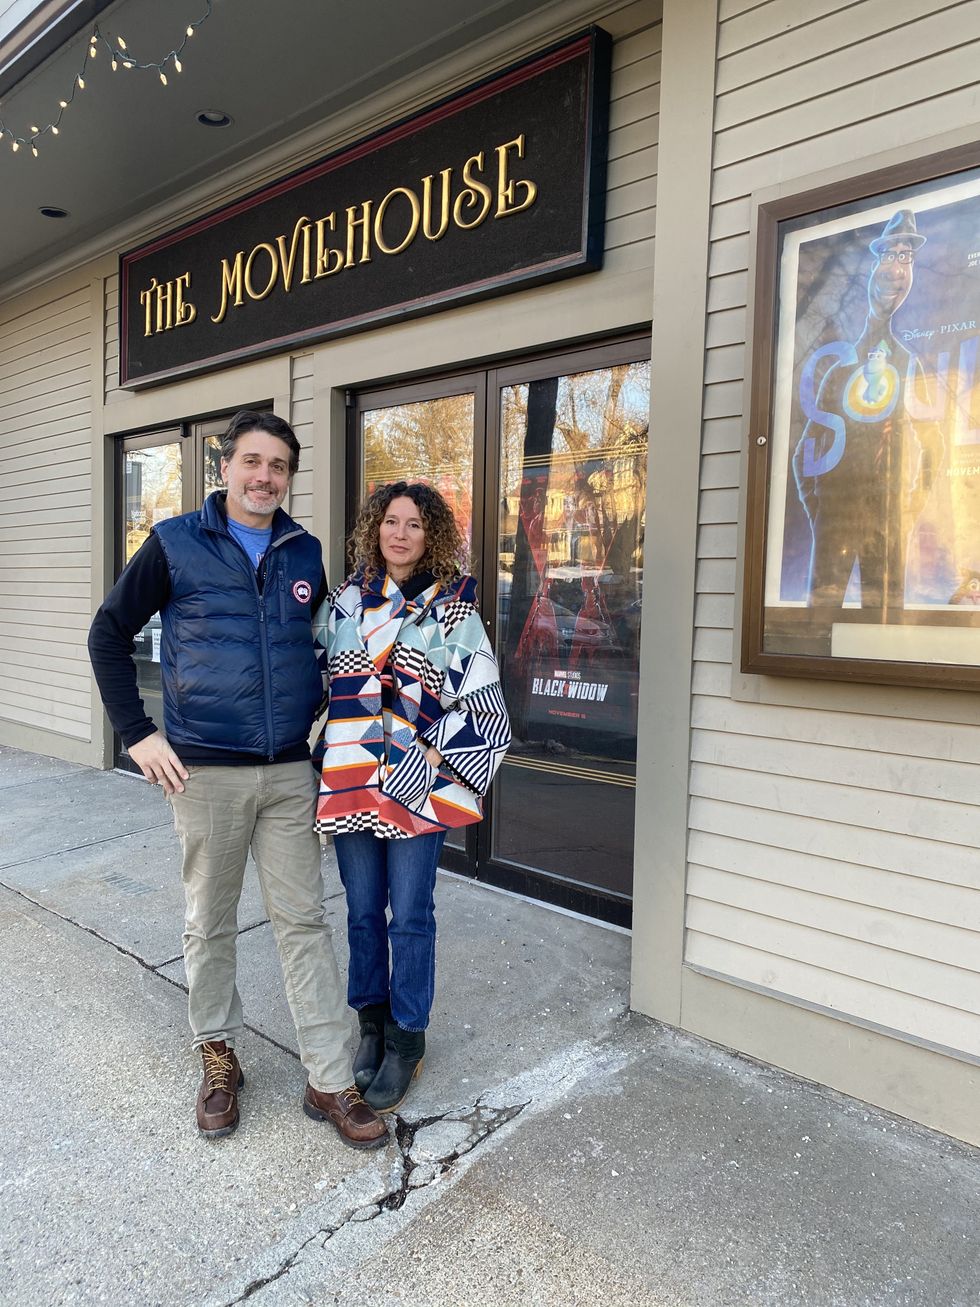 Continuity (and change) in store for Moviehouse